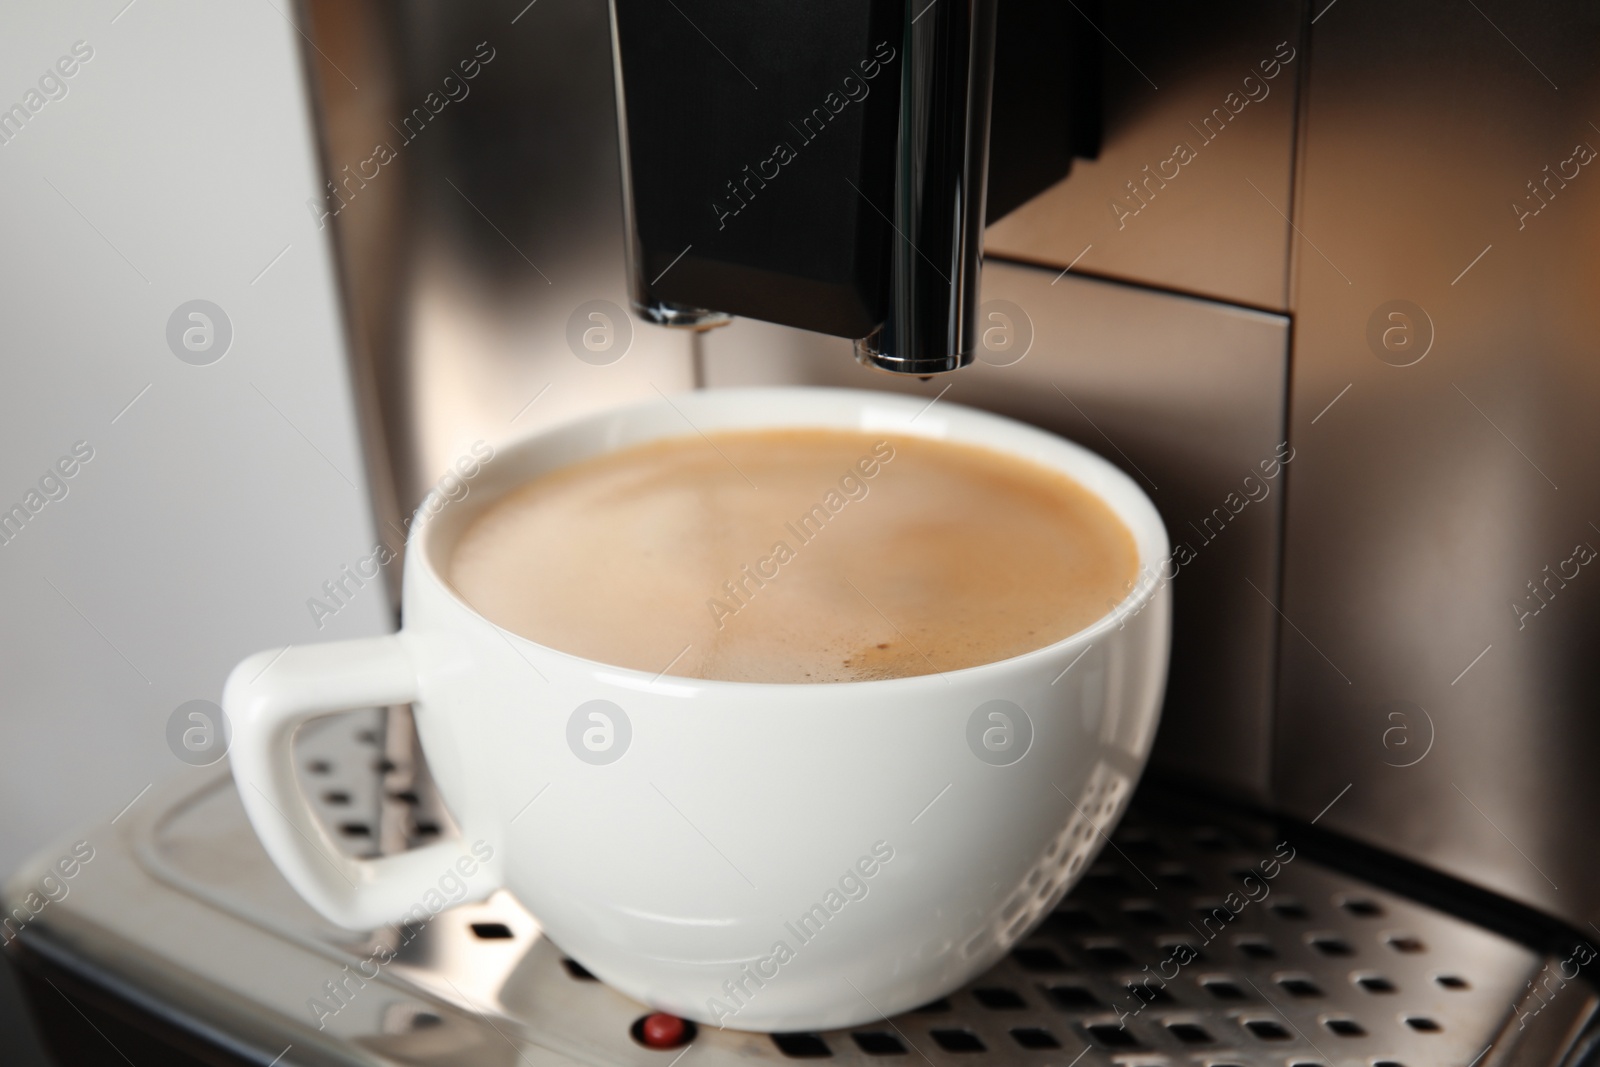 Photo of Espresso machine with cup of fresh coffee on drip tray against light background, closeup